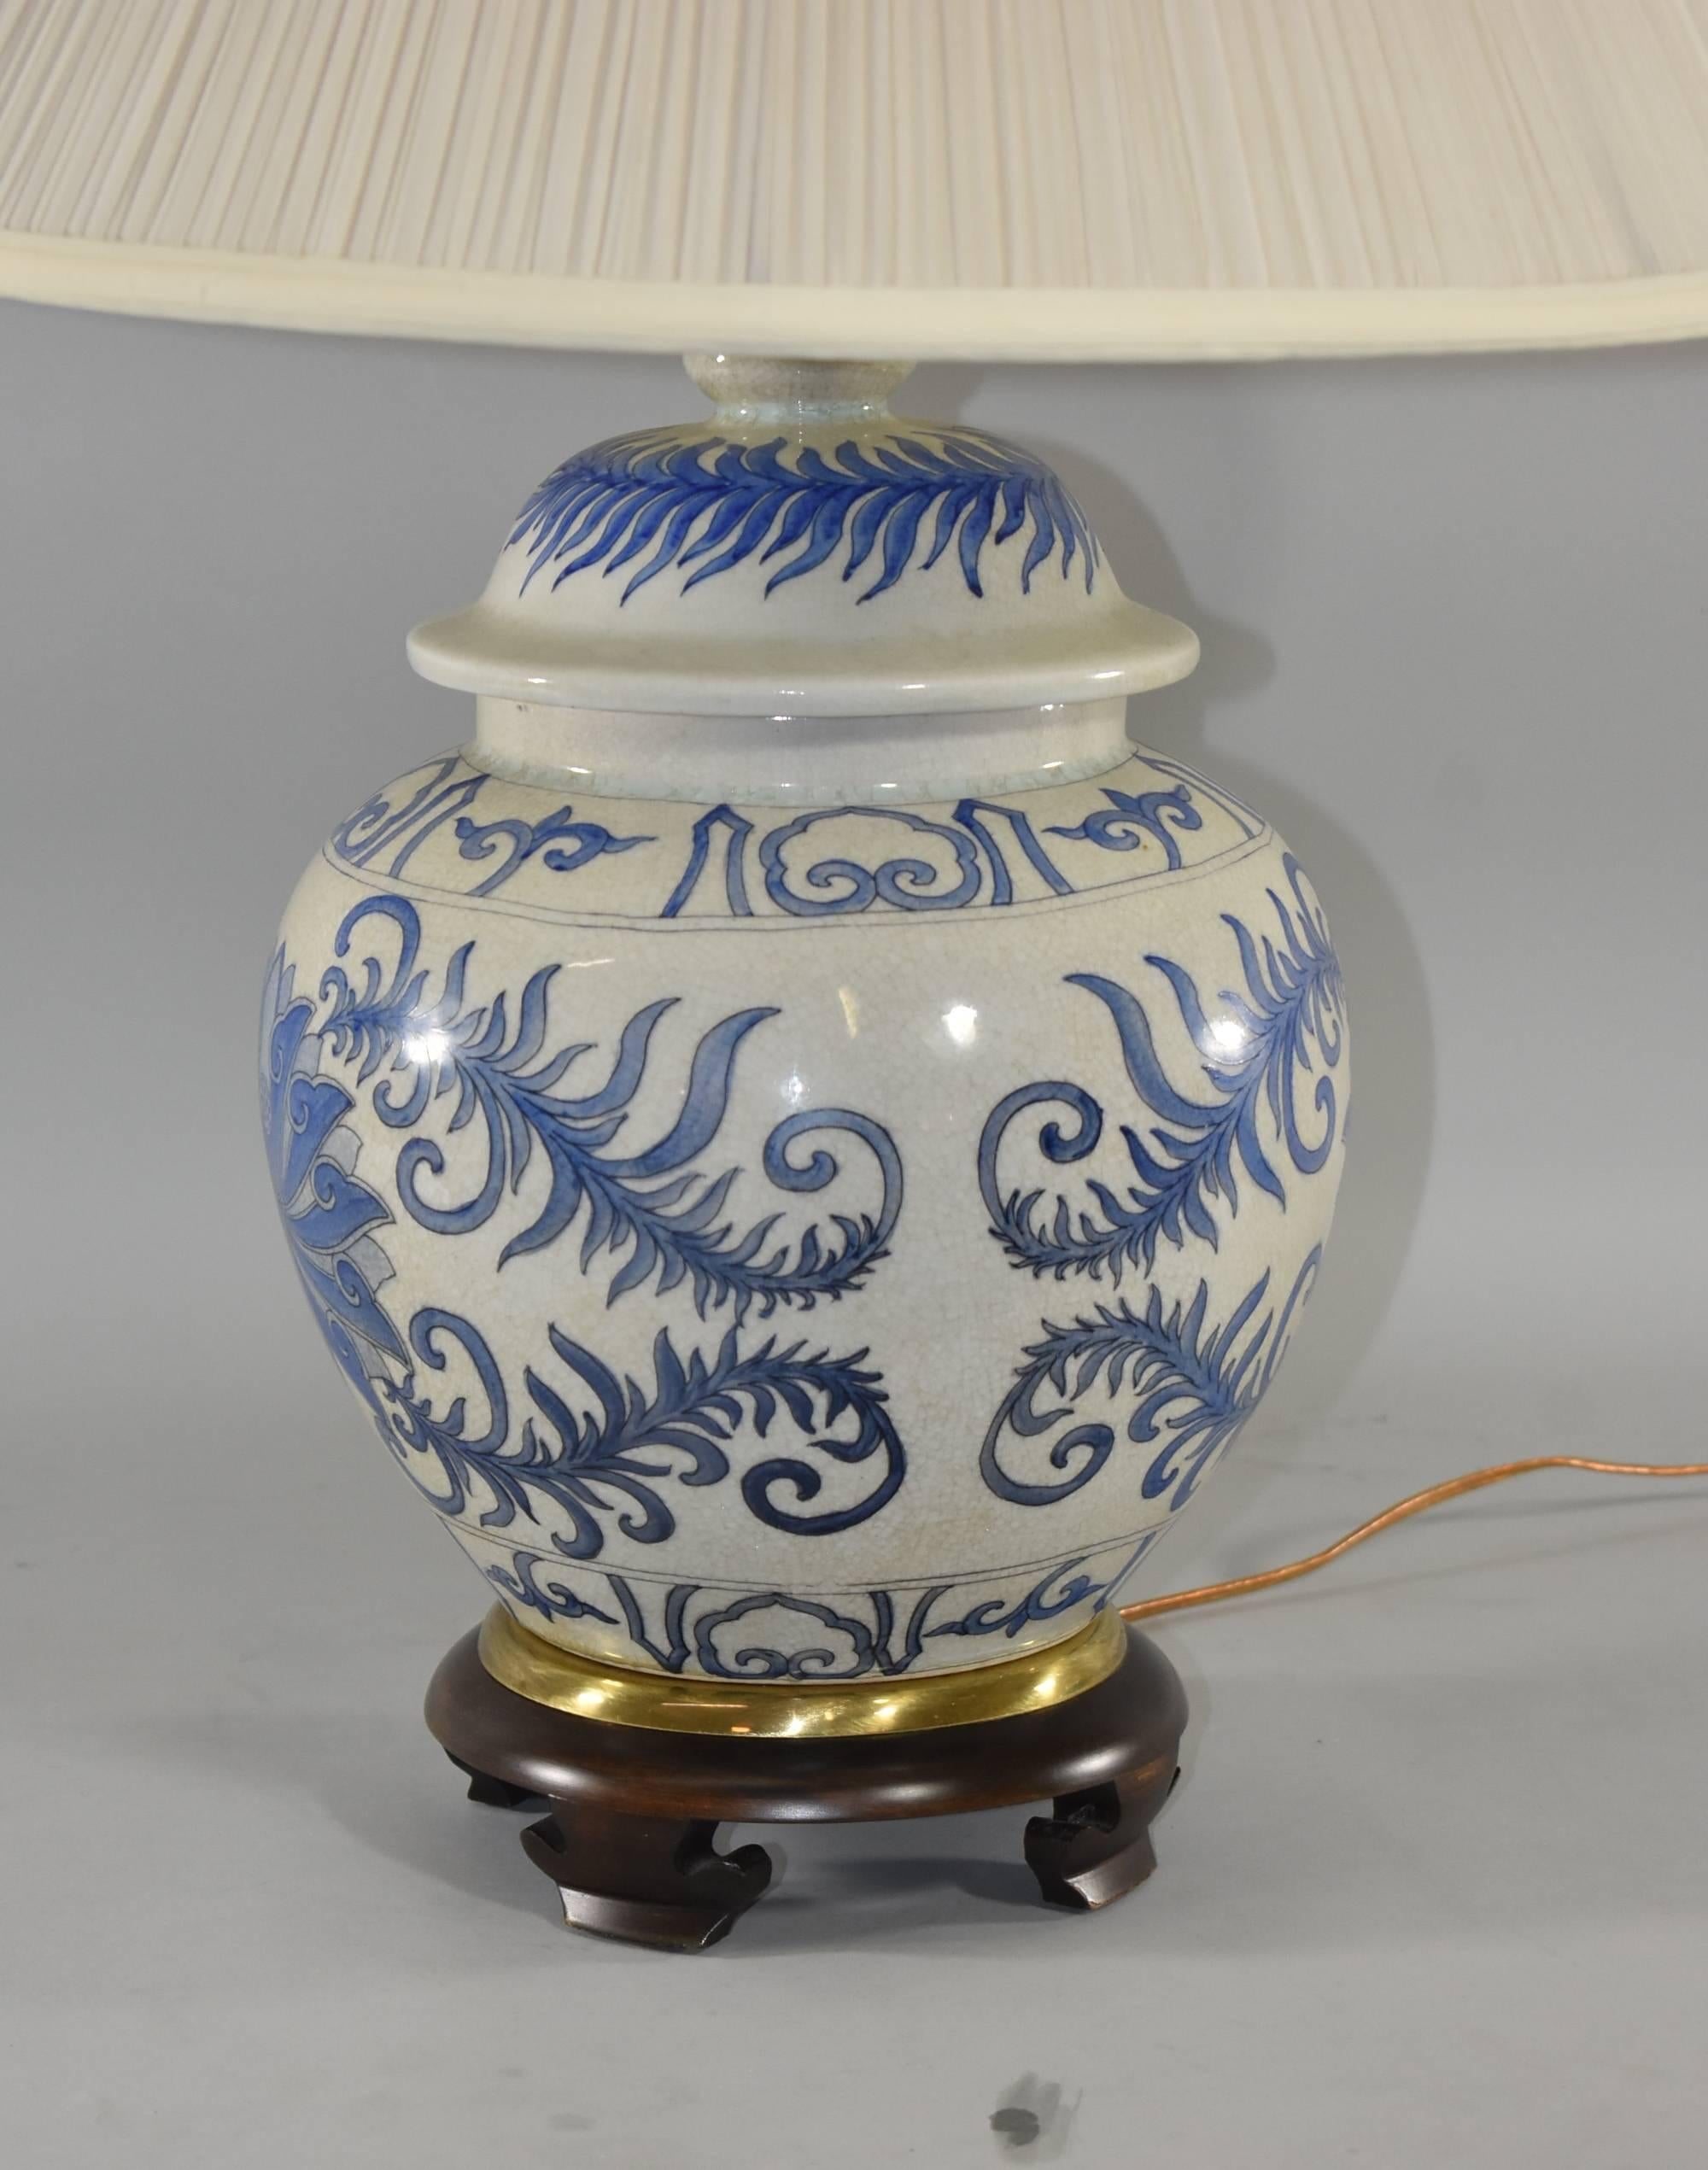 An eye-catching Asian Style ginger jar lamp by Frederick Cooper. It features a blue and white body with leaf detail and a carved wood base. The original Frederick Cooper label is attached.